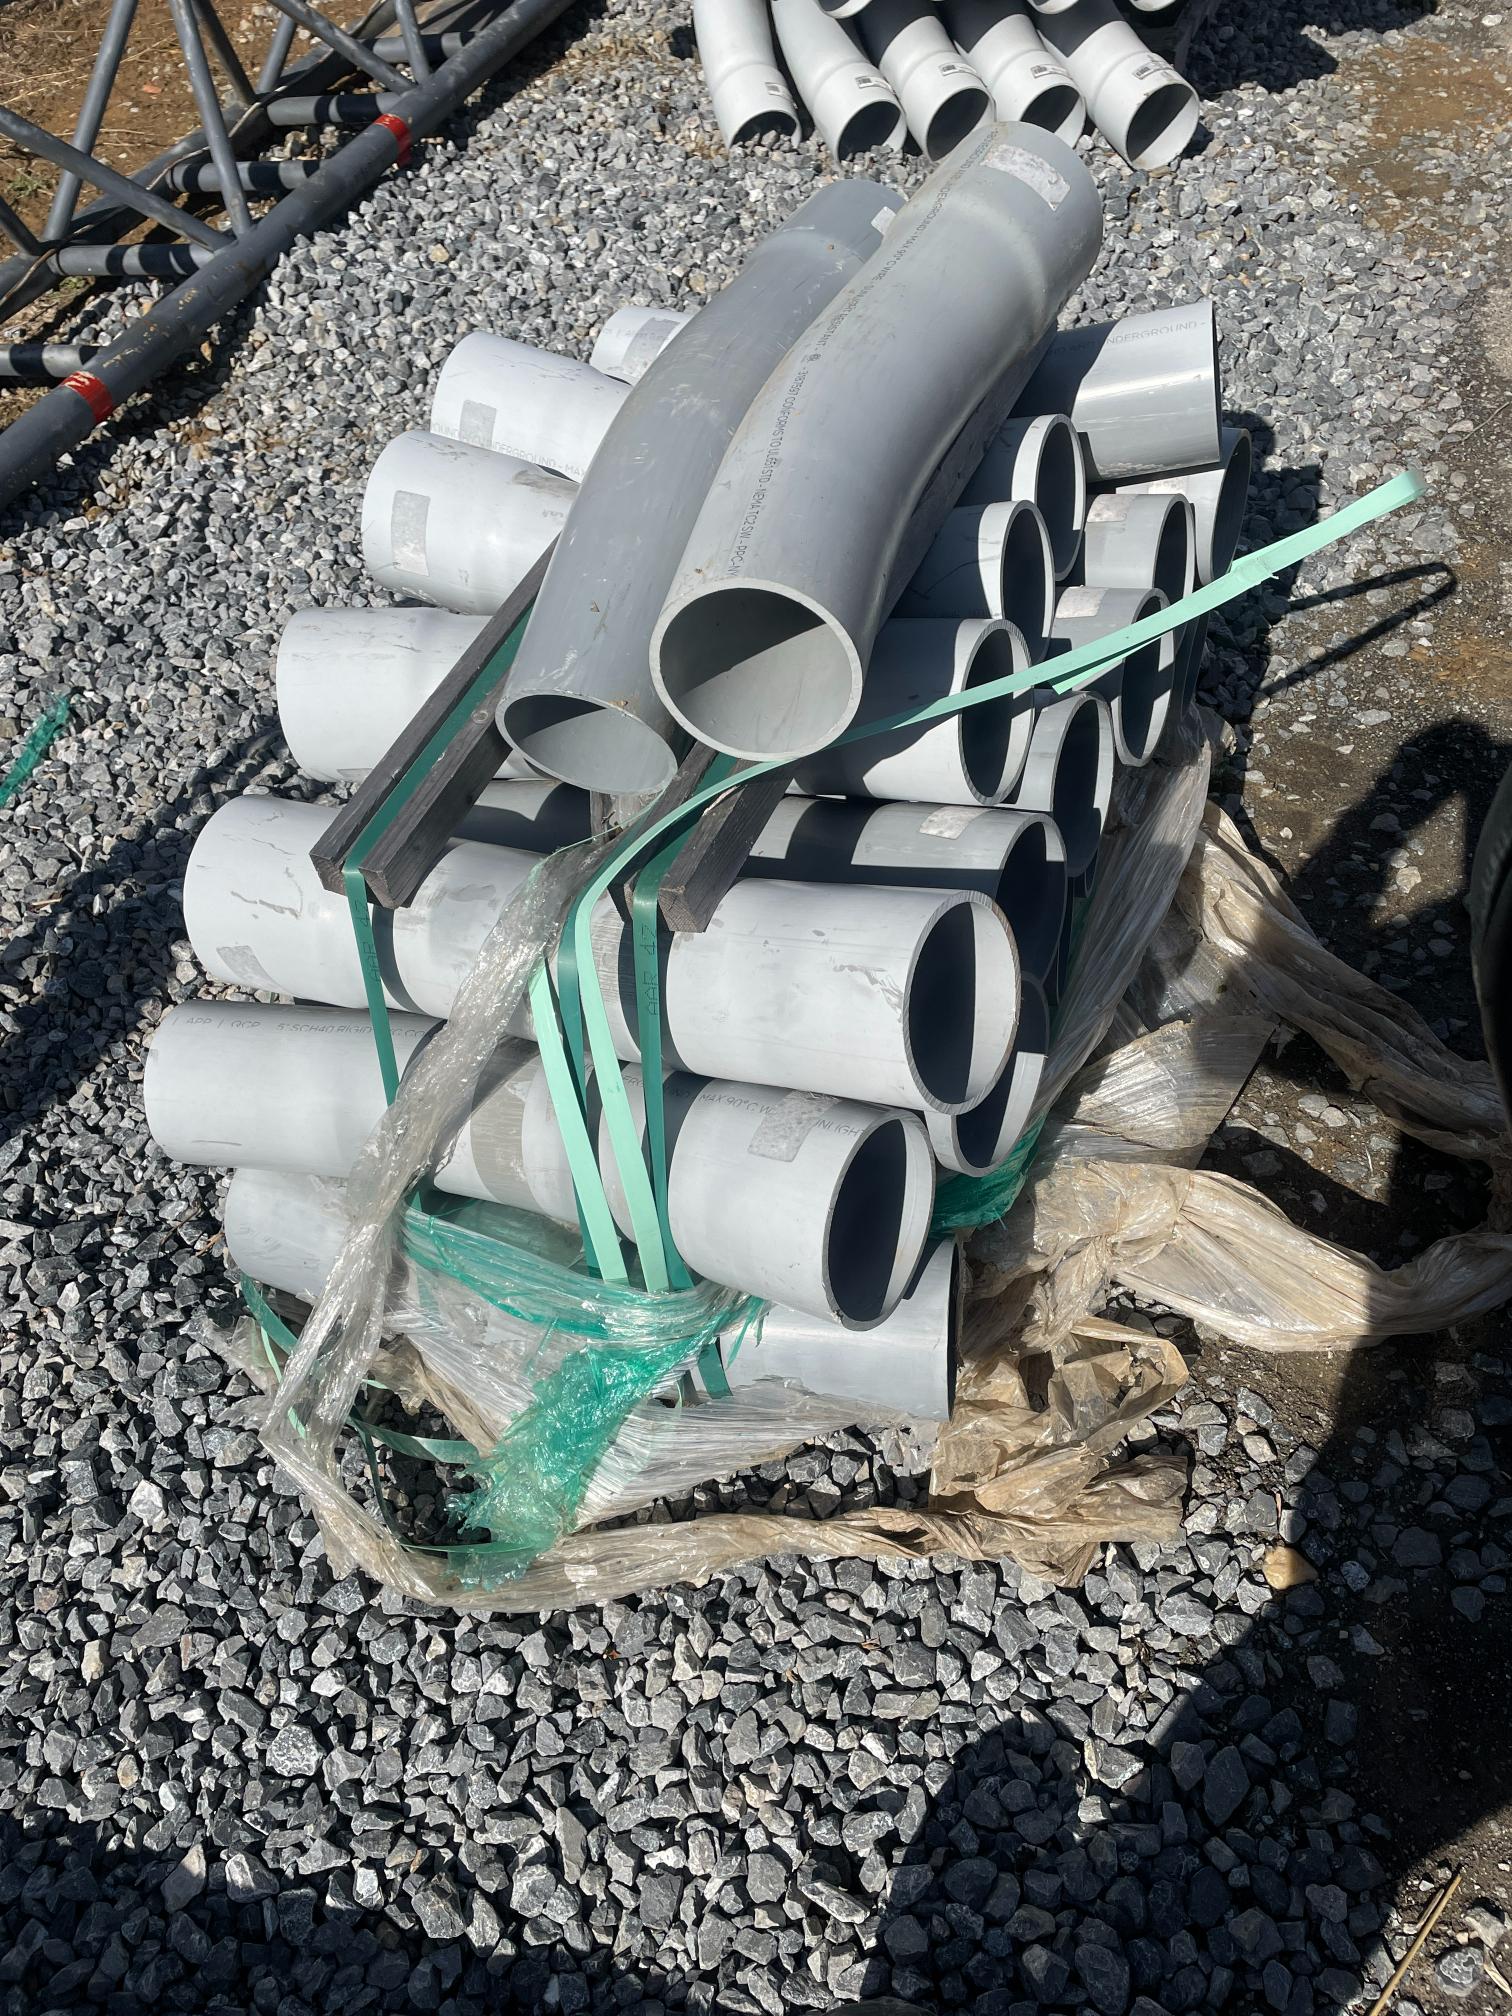 Skid Lot Of 5"X24" Schedule 40 PVC Pipe